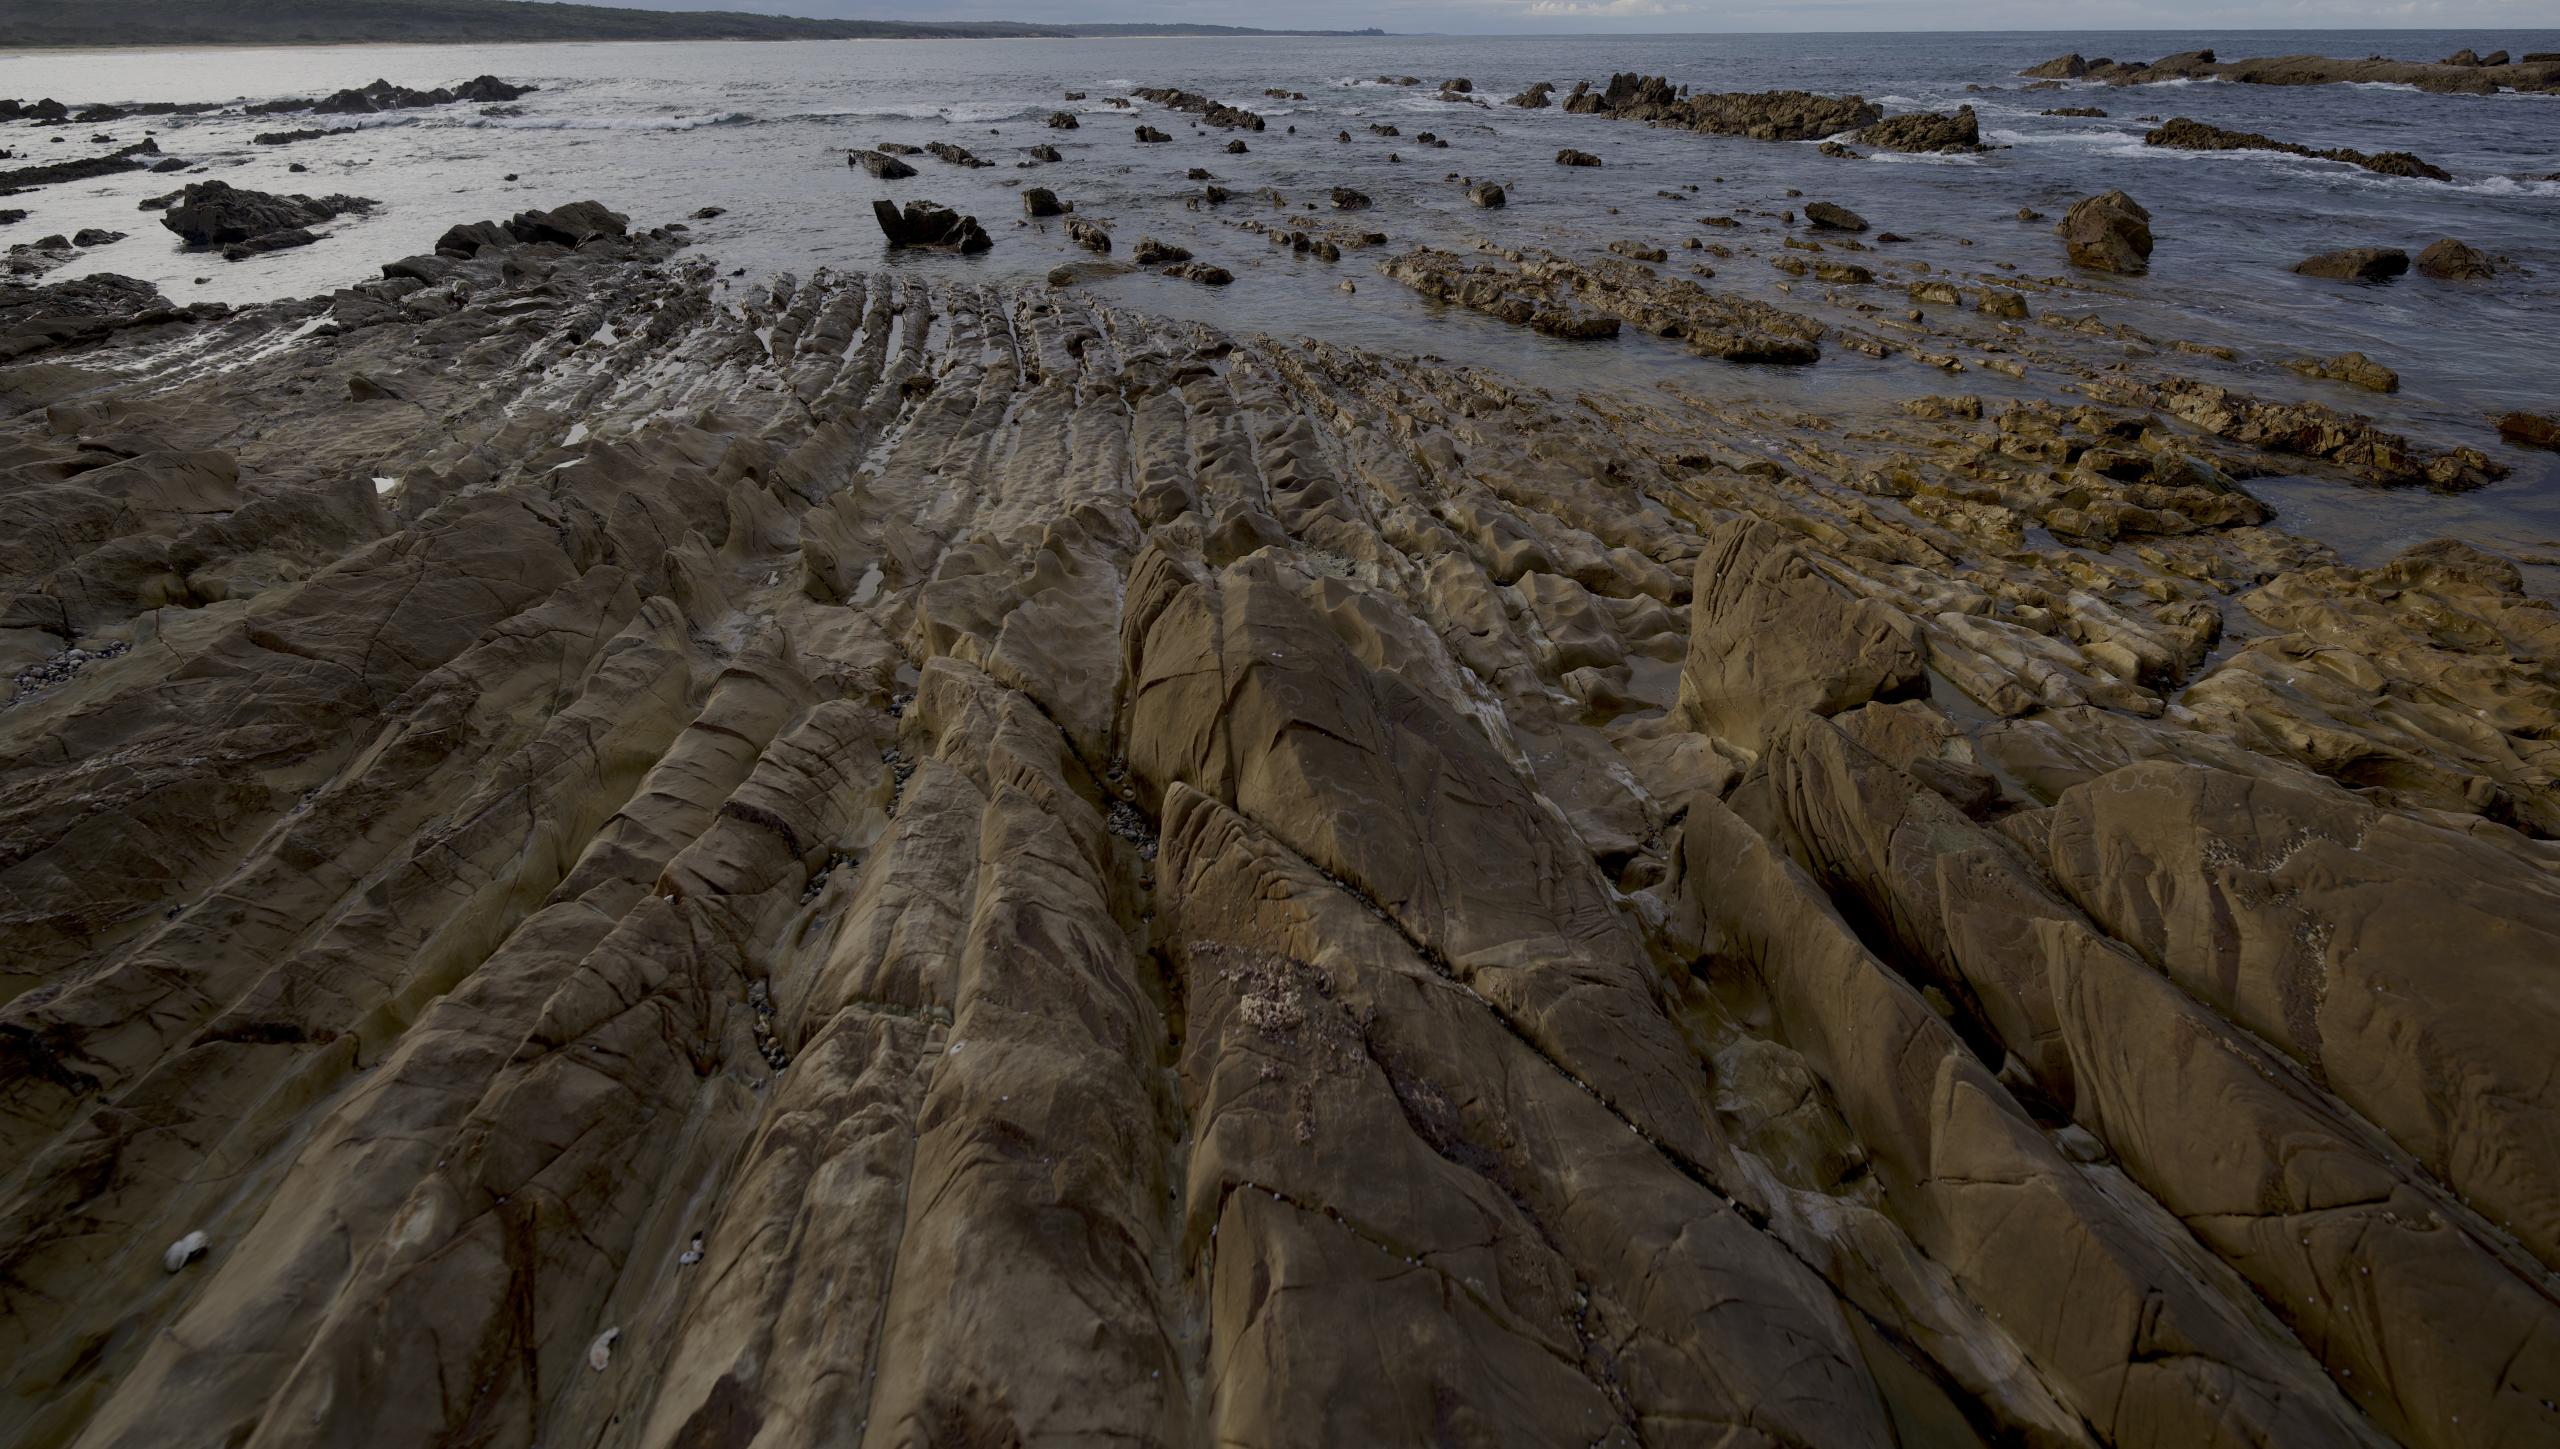 Rockpools at low tide.